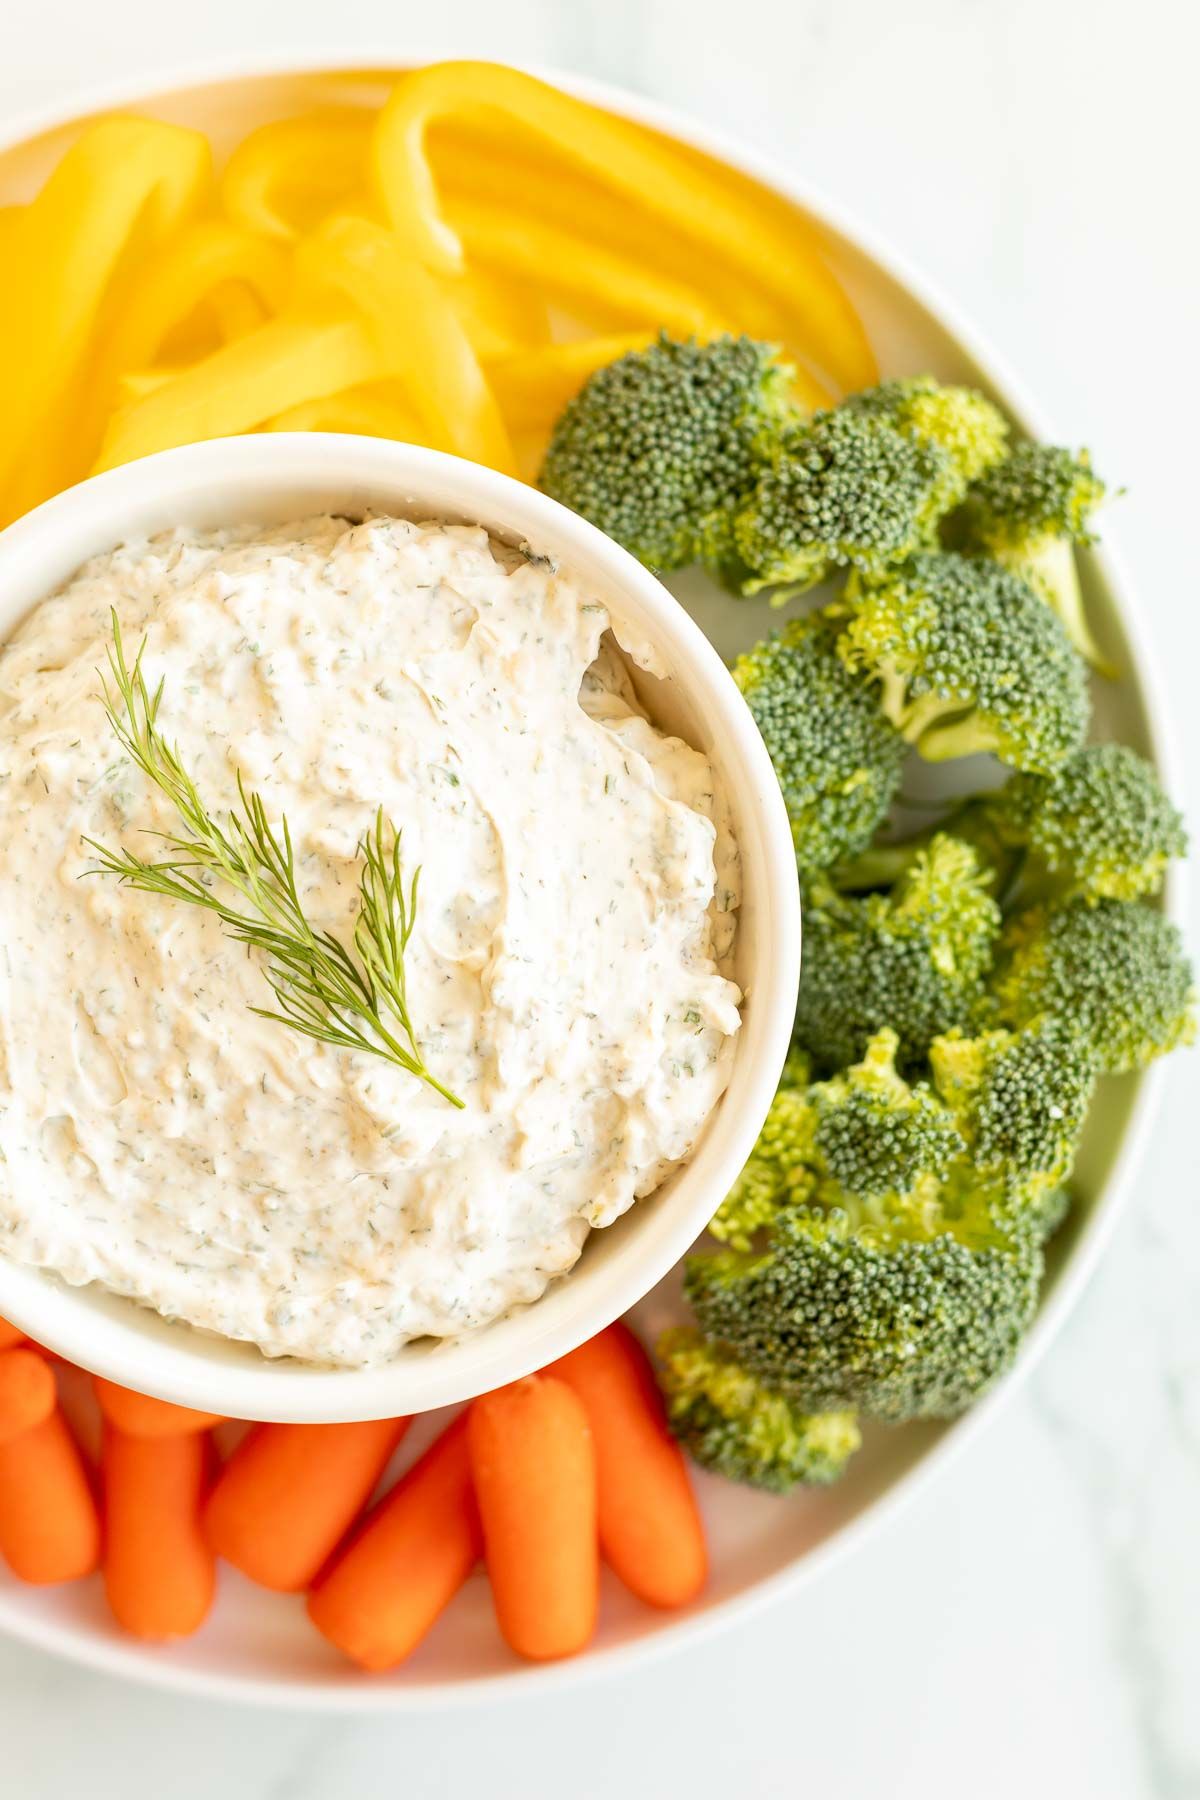 A round platter full of veggies and dill dip. 